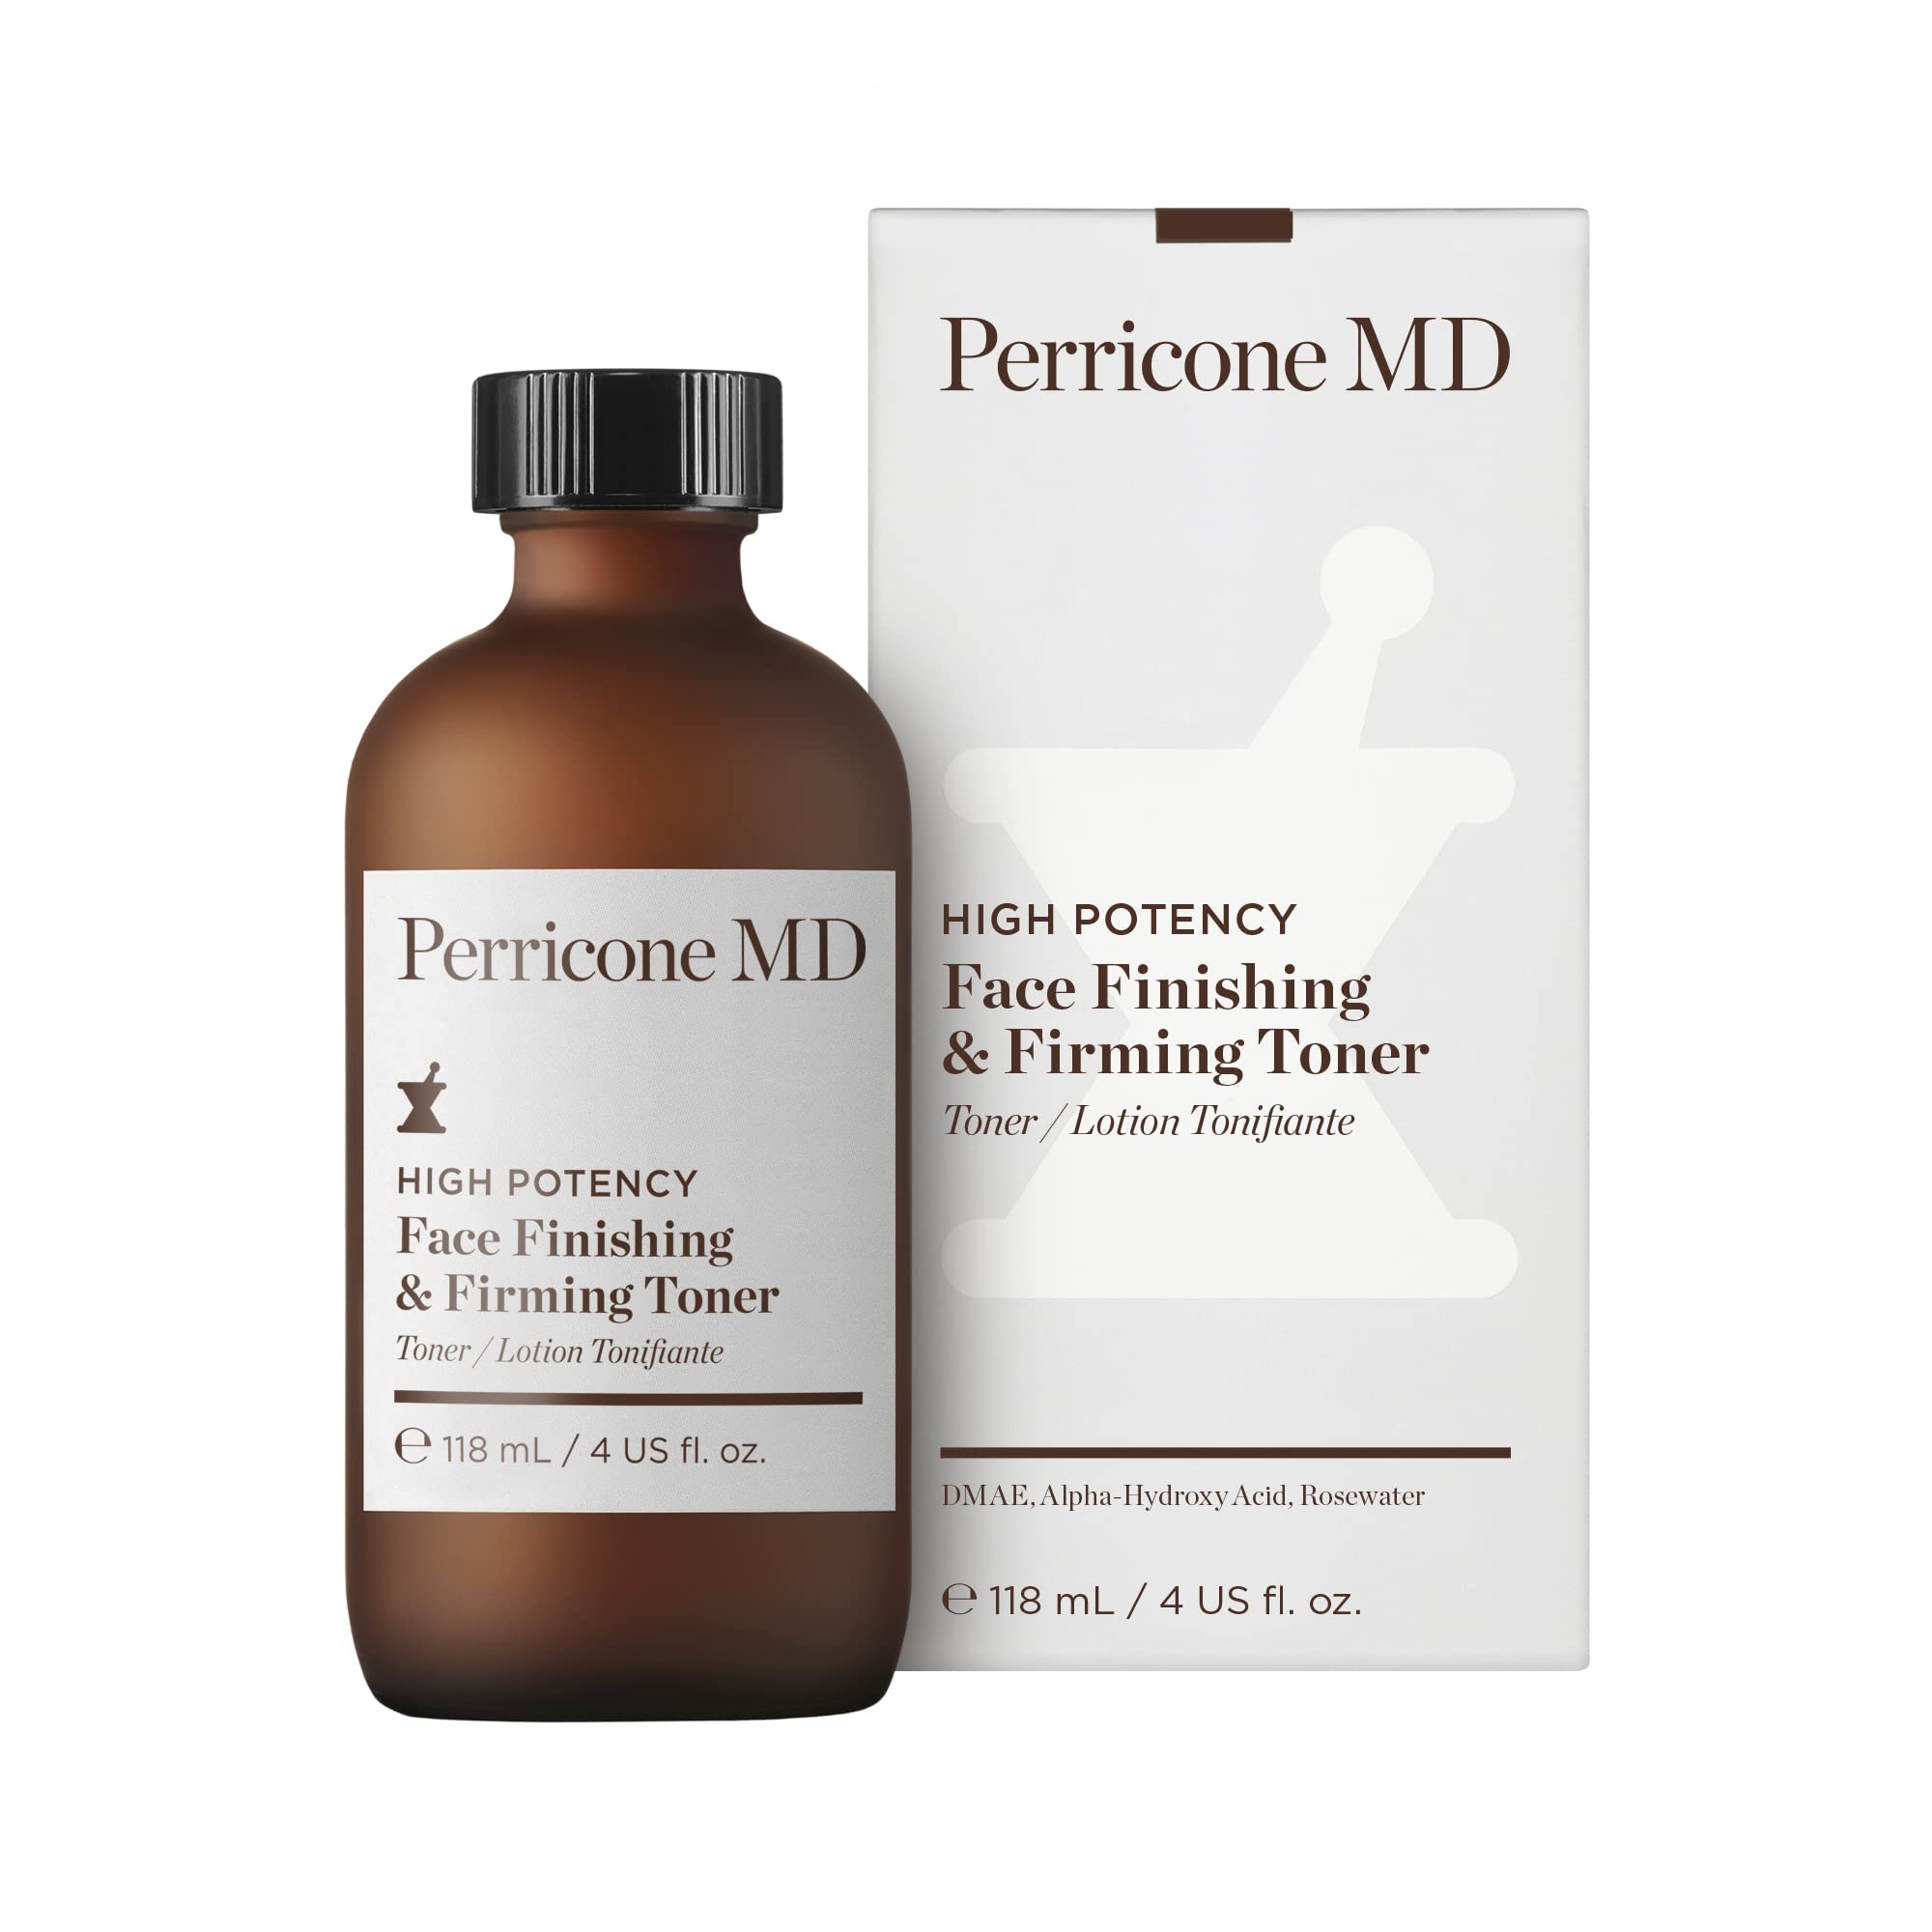 Perricone MD High Potency Classics Face Finishing & Firming Toner, 4 oz.